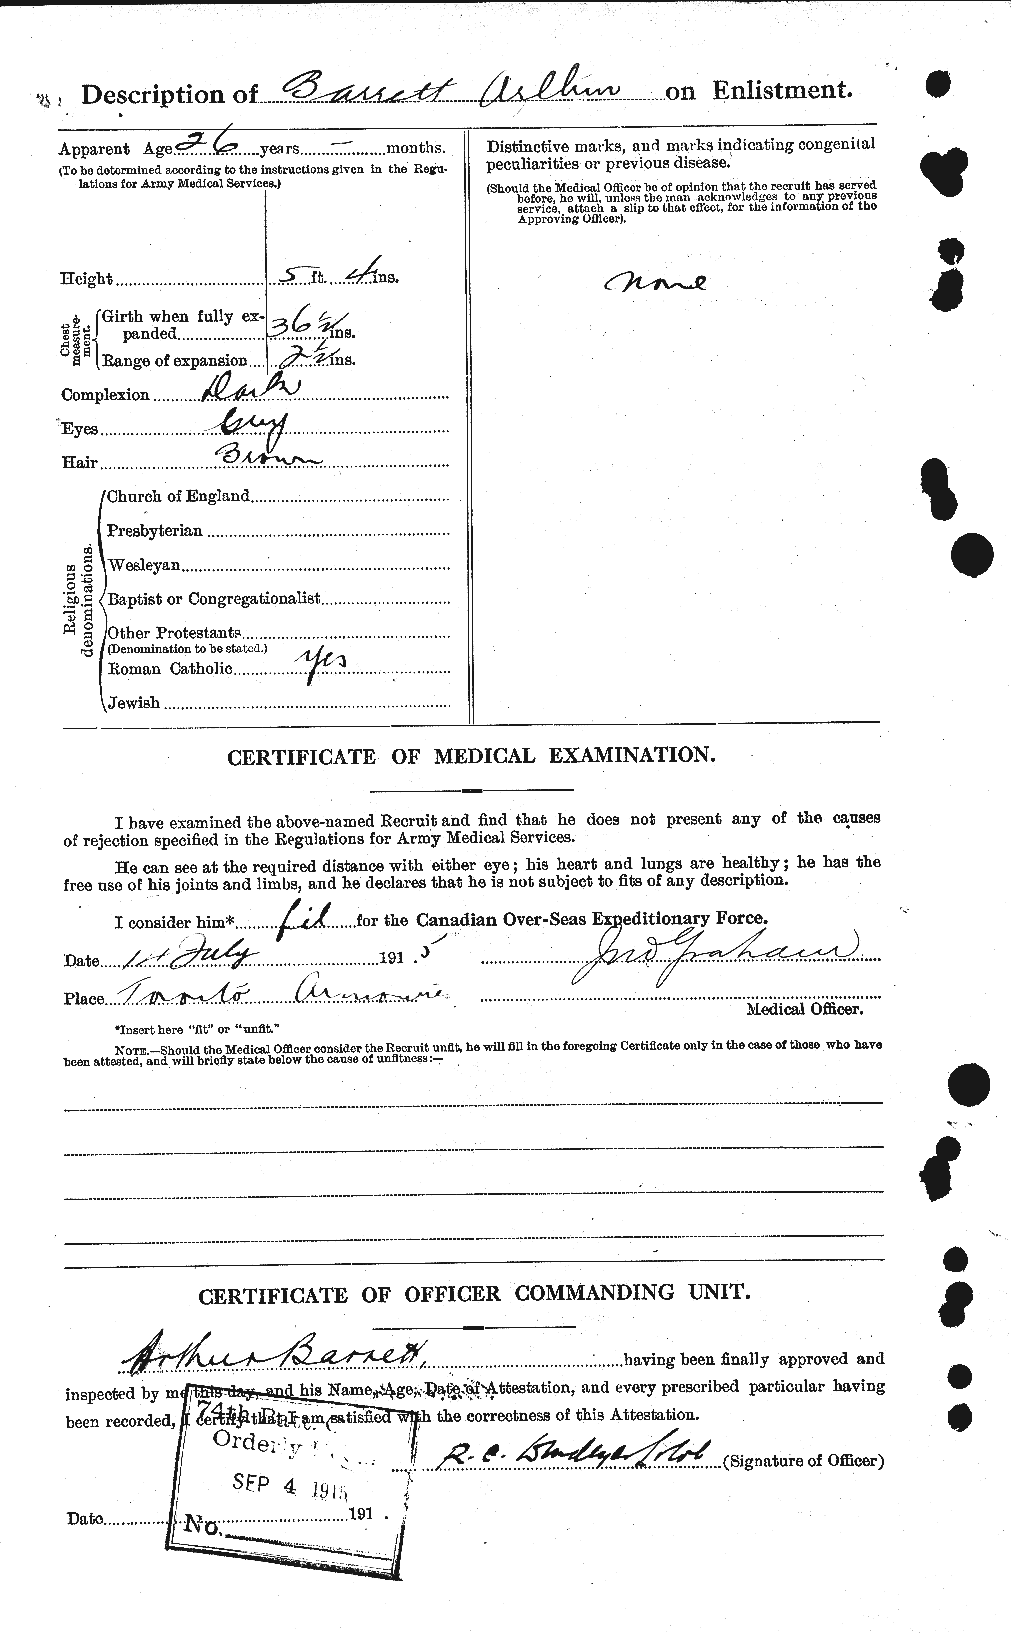 Personnel Records of the First World War - CEF 222251b